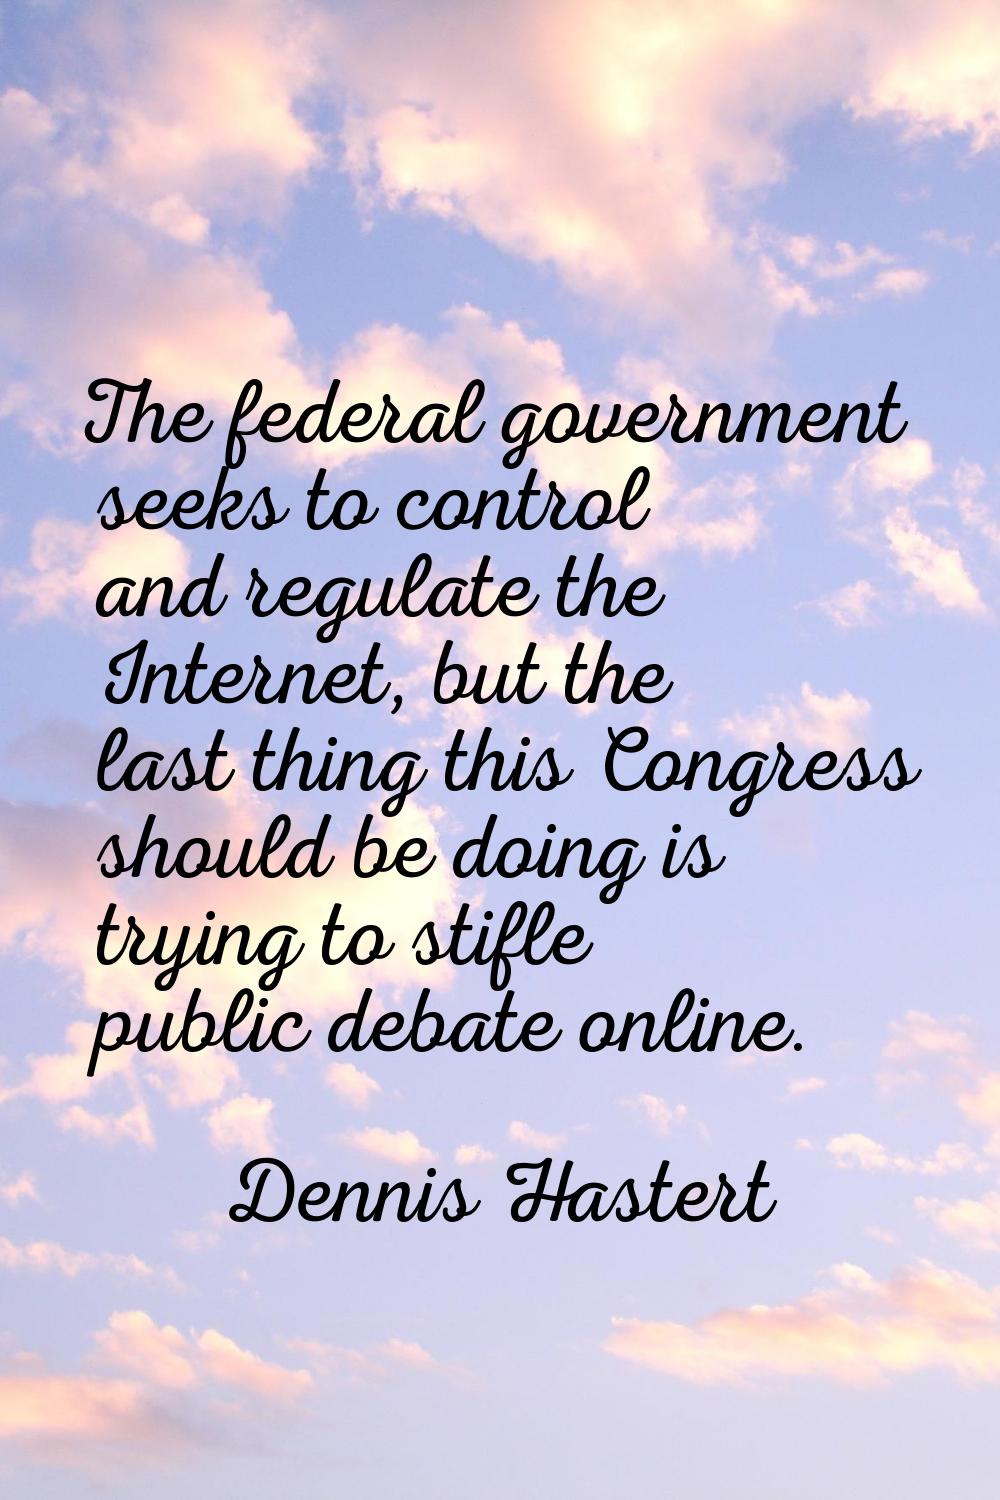 The federal government seeks to control and regulate the Internet, but the last thing this Congress